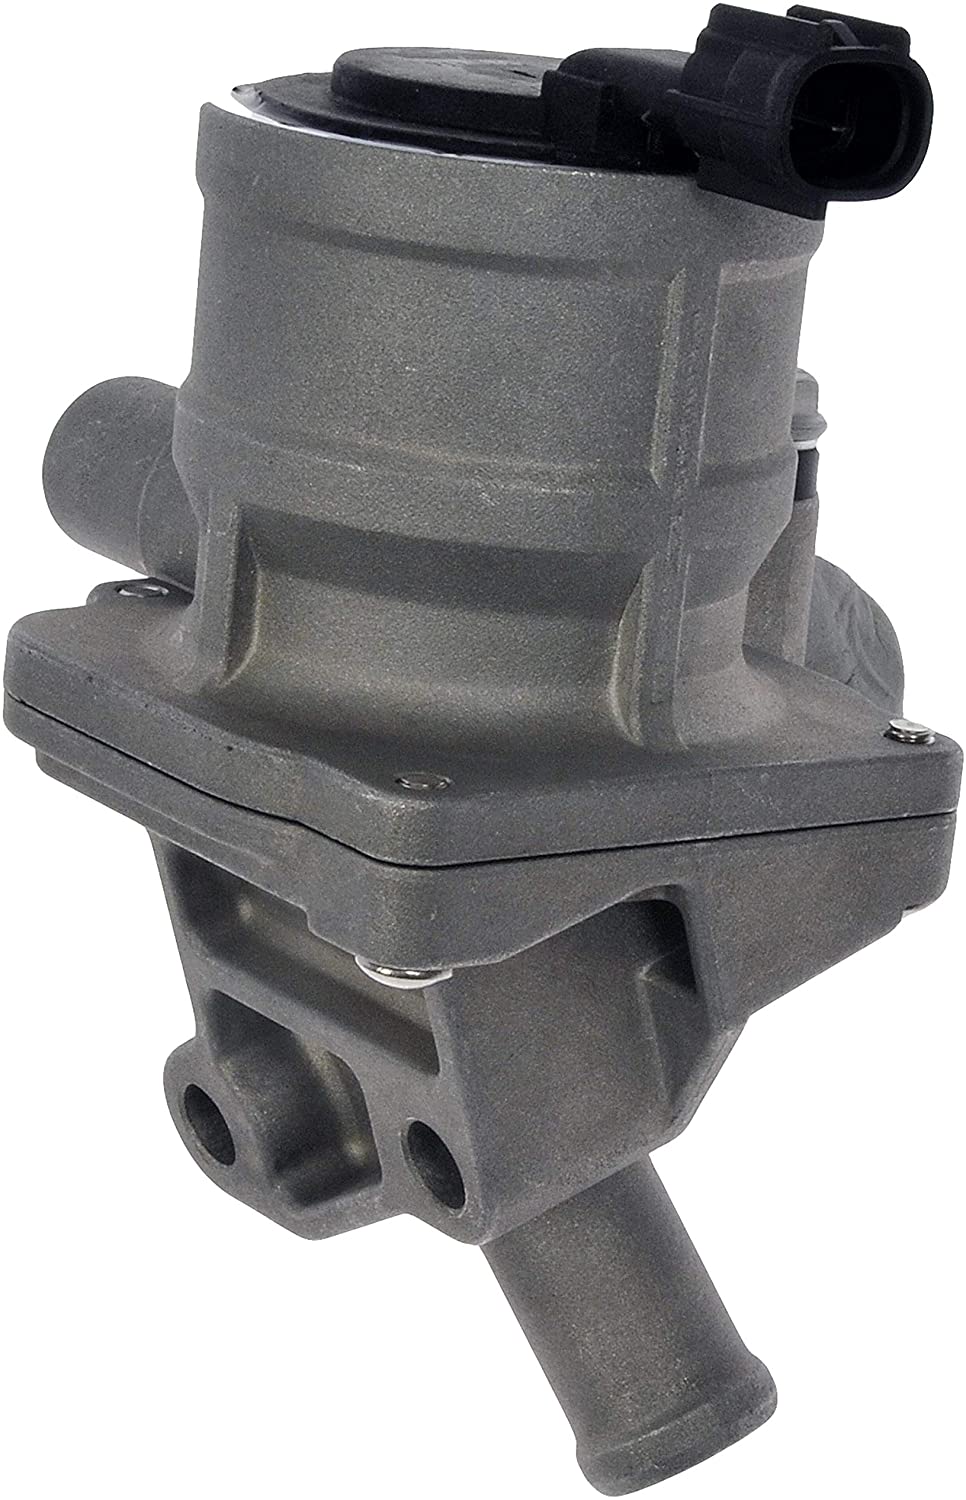 Dorman 911-644 Secondary Air Injection Control Valve for Select Lexus/Toyota Models